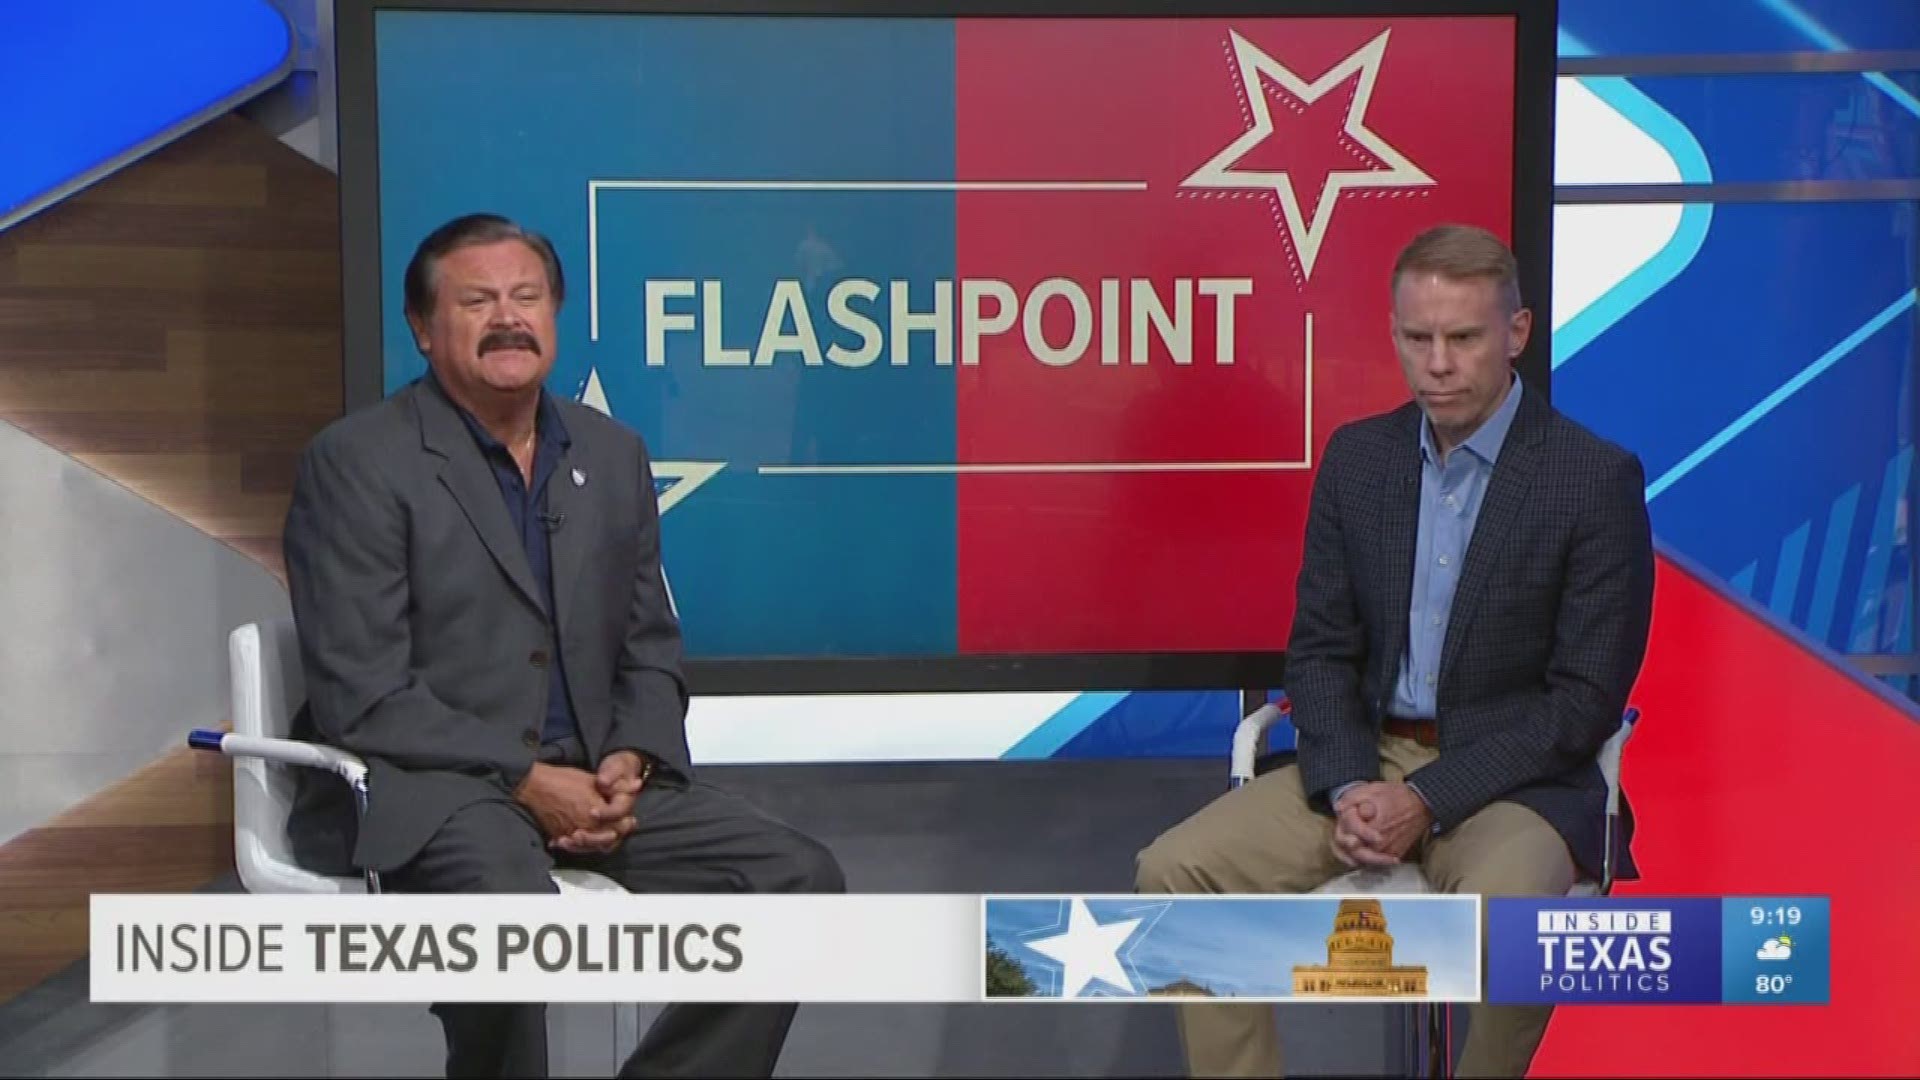 Texas Governor Greg Abbott has talked about the failures that led, in part, to the massacre in Odessa, Texas. Democrats want Gov. Abbott to call a special session and do something about it. Two takes in Flashpoint. From the right, Wade Emmert, former chairman of Dallas County's Republican Party. And from the left, LULAC's National President Domingo Garcia.